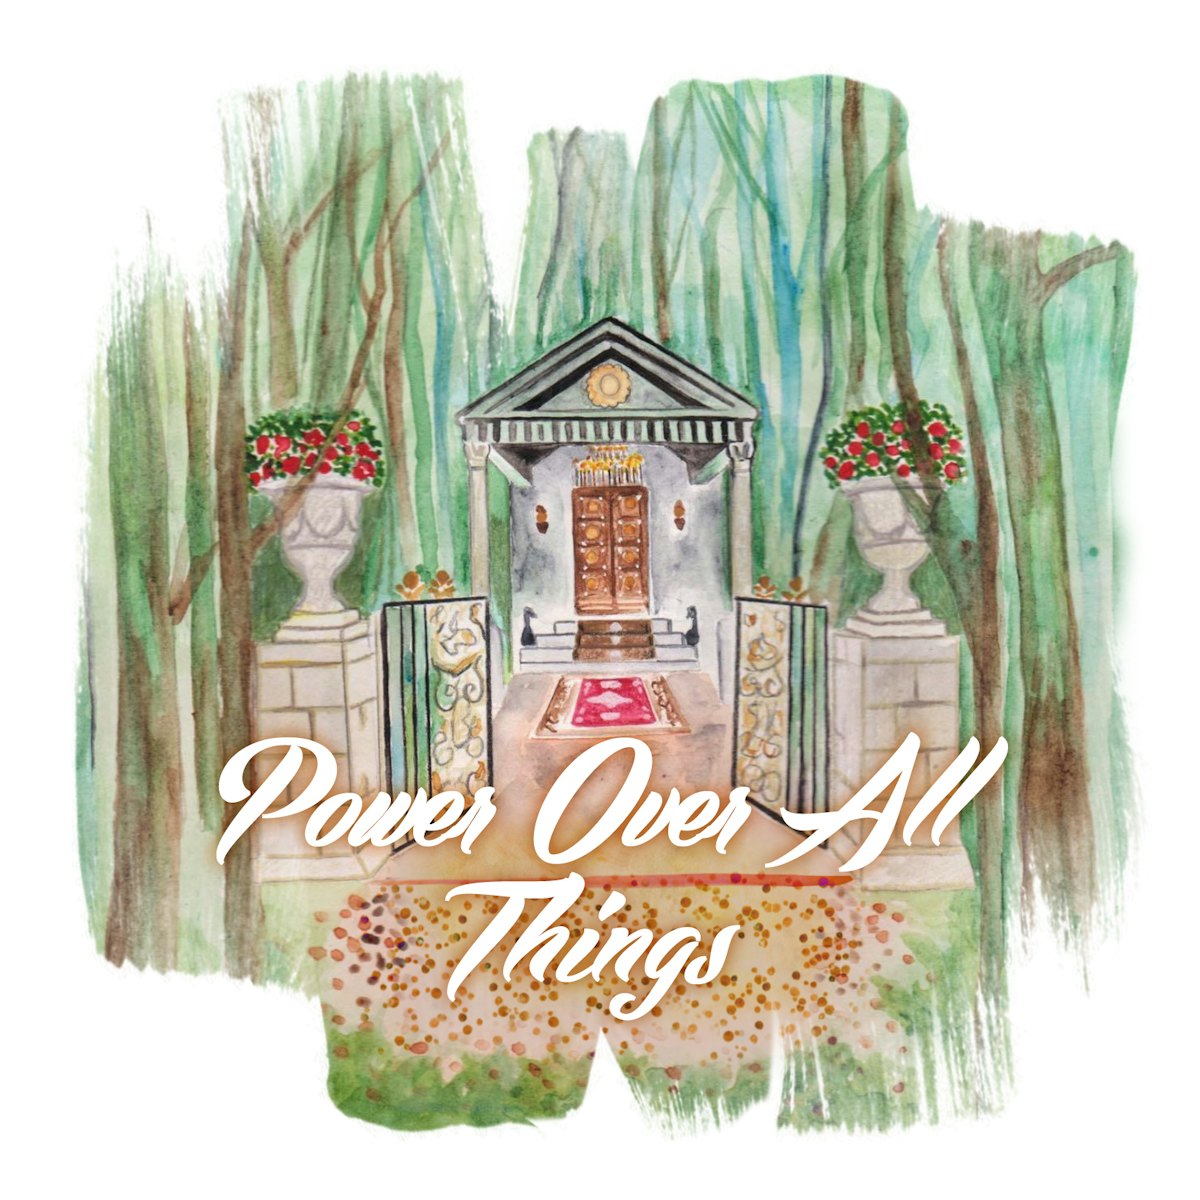 Cover of the new single “Power Over All Things”